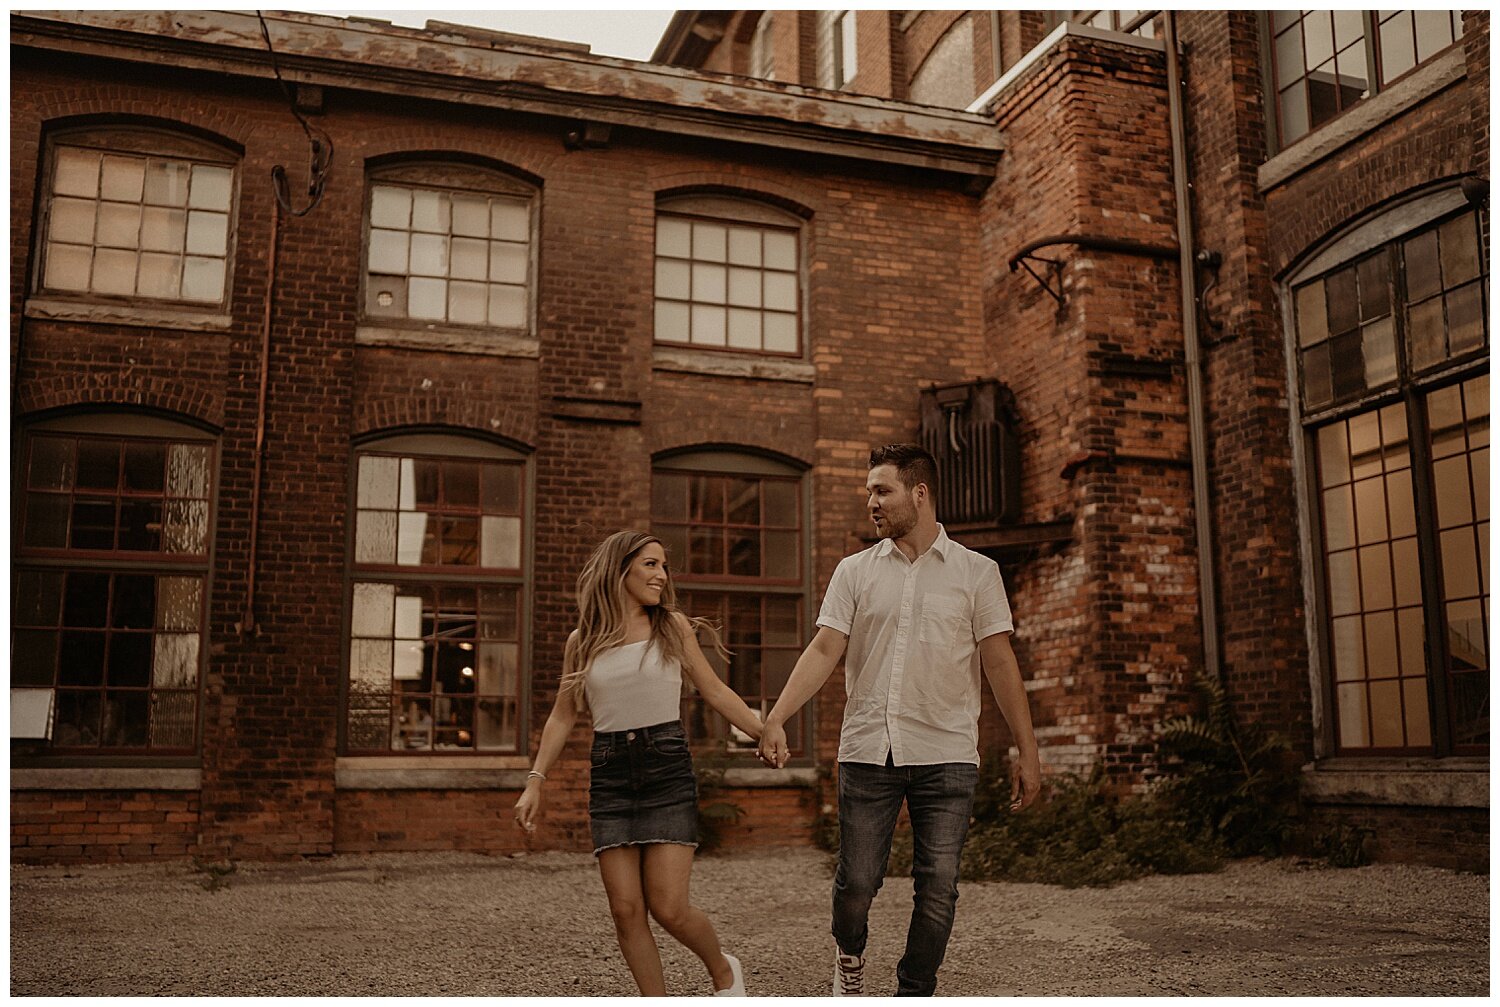 Cotton_Factory_And_Waterfall_Engagement_Session_Hamilton_Ontario_Wedding_Photographer_0064.jpg